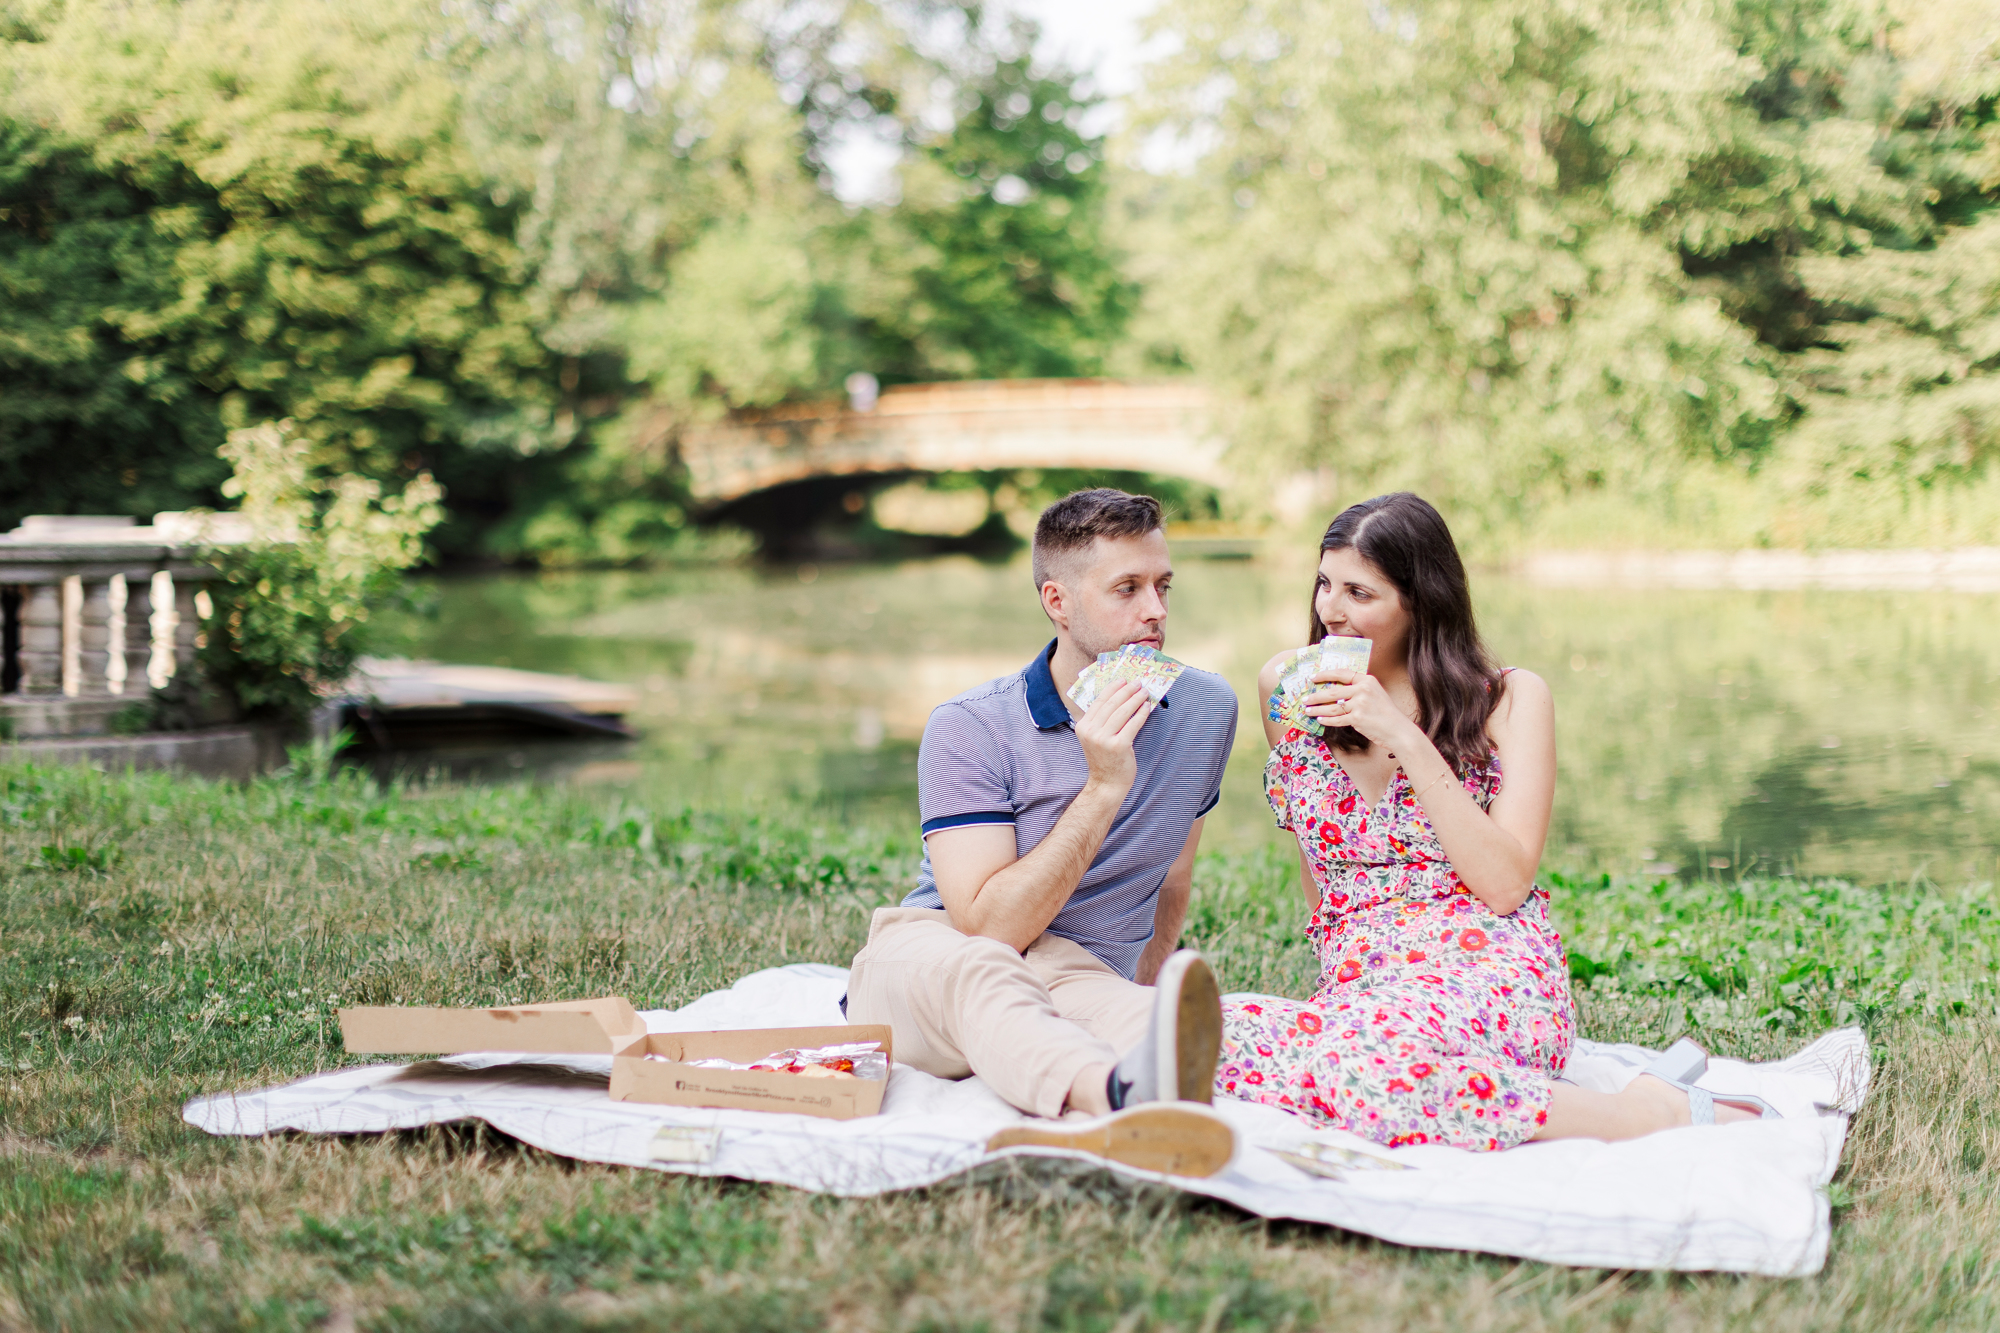 Awesome engagement session in Prospect Park